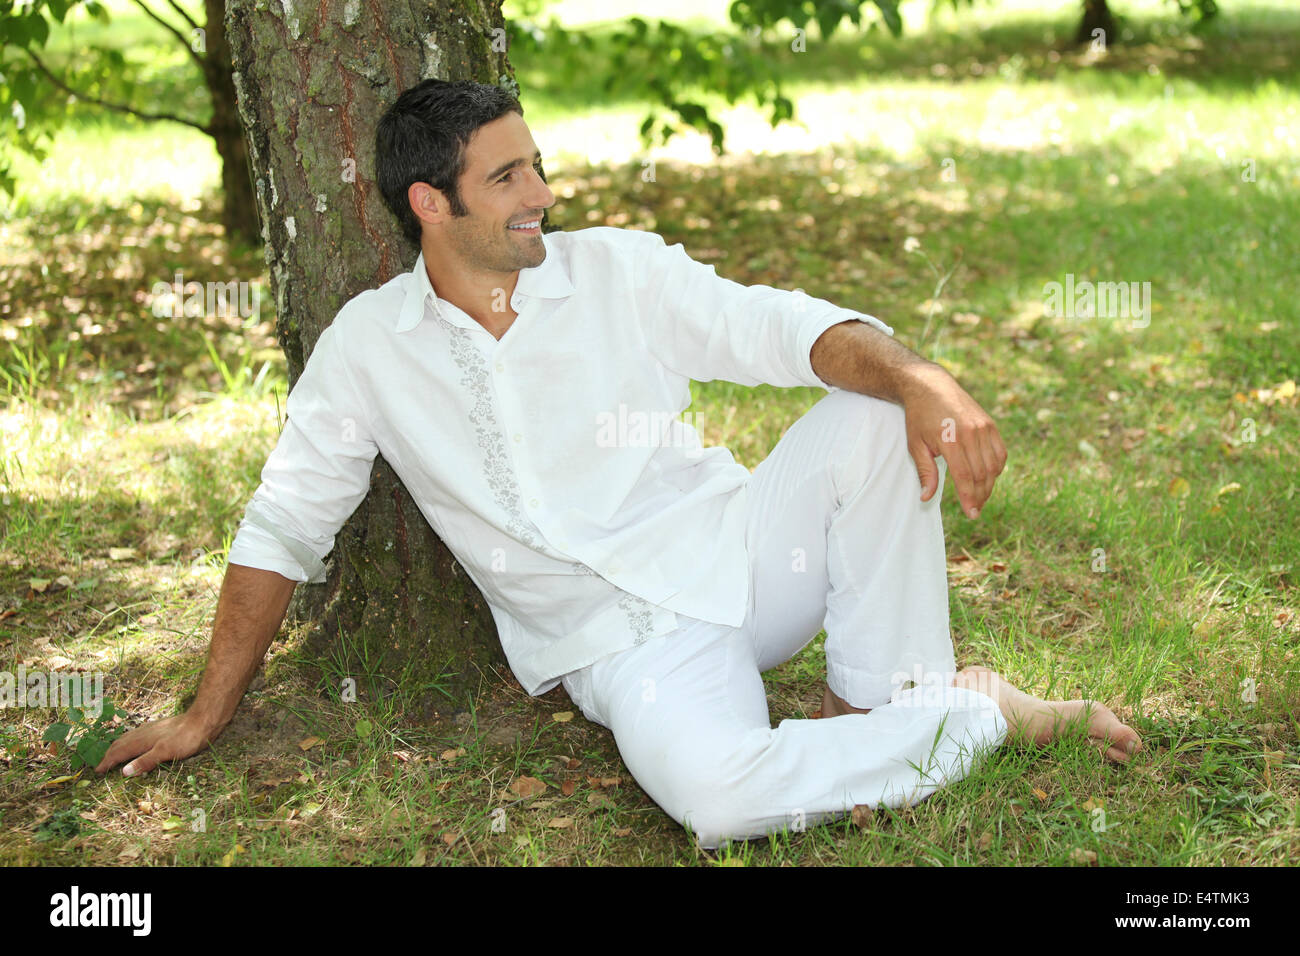 35 years old lying down under a tree Stock Photo